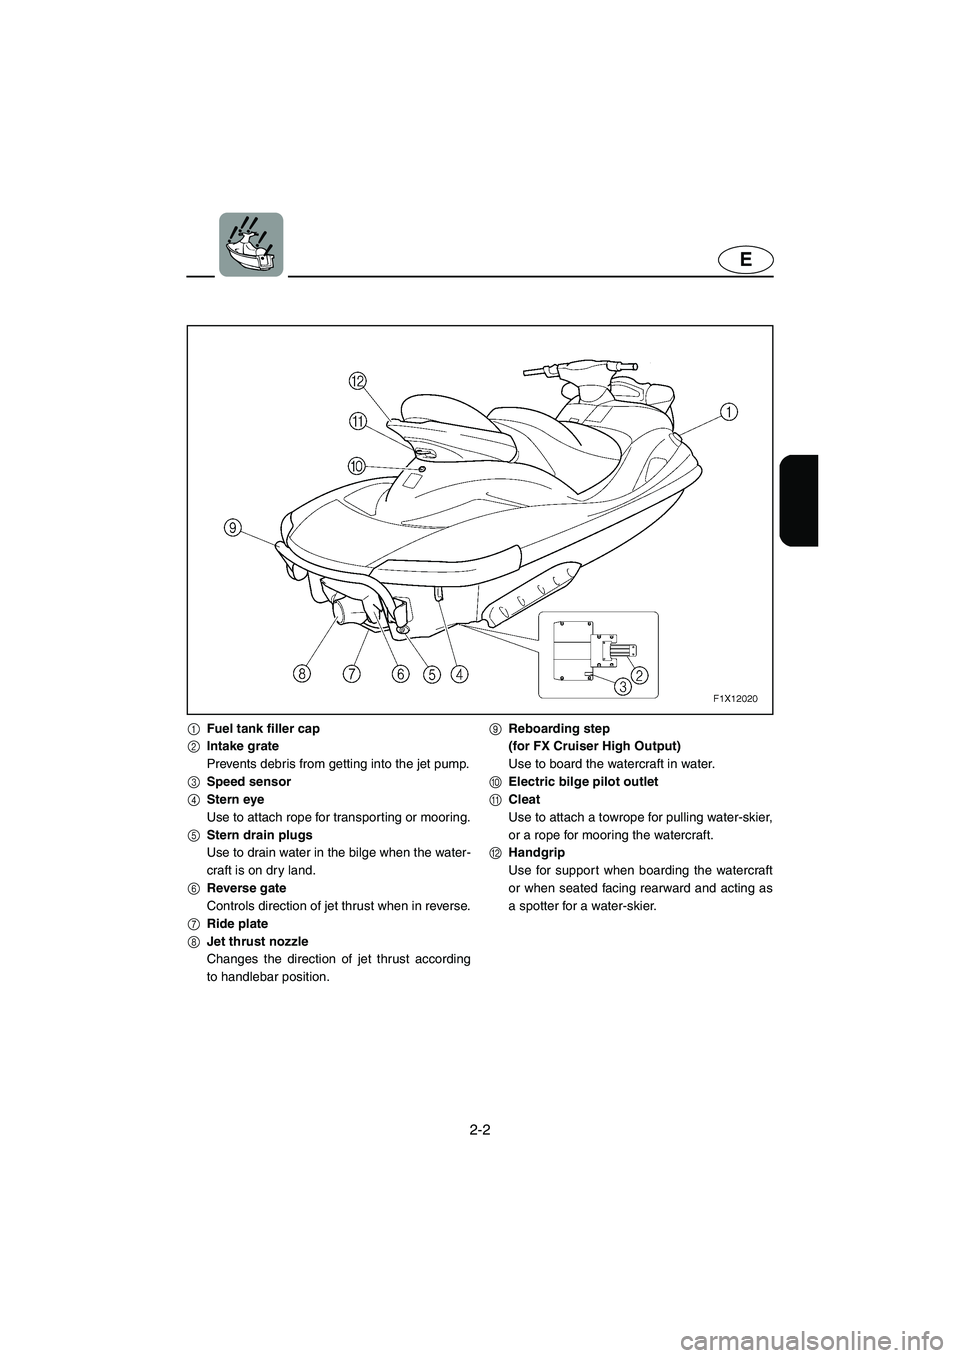 YAMAHA FX HO 2006  Owners Manual 2-2
E
1Fuel tank filler cap
2Intake grate
Prevents debris from getting into the jet pump.
3Speed sensor
4Stern eye
Use to attach rope for transporting or mooring.
5Stern drain plugs
Use to drain water